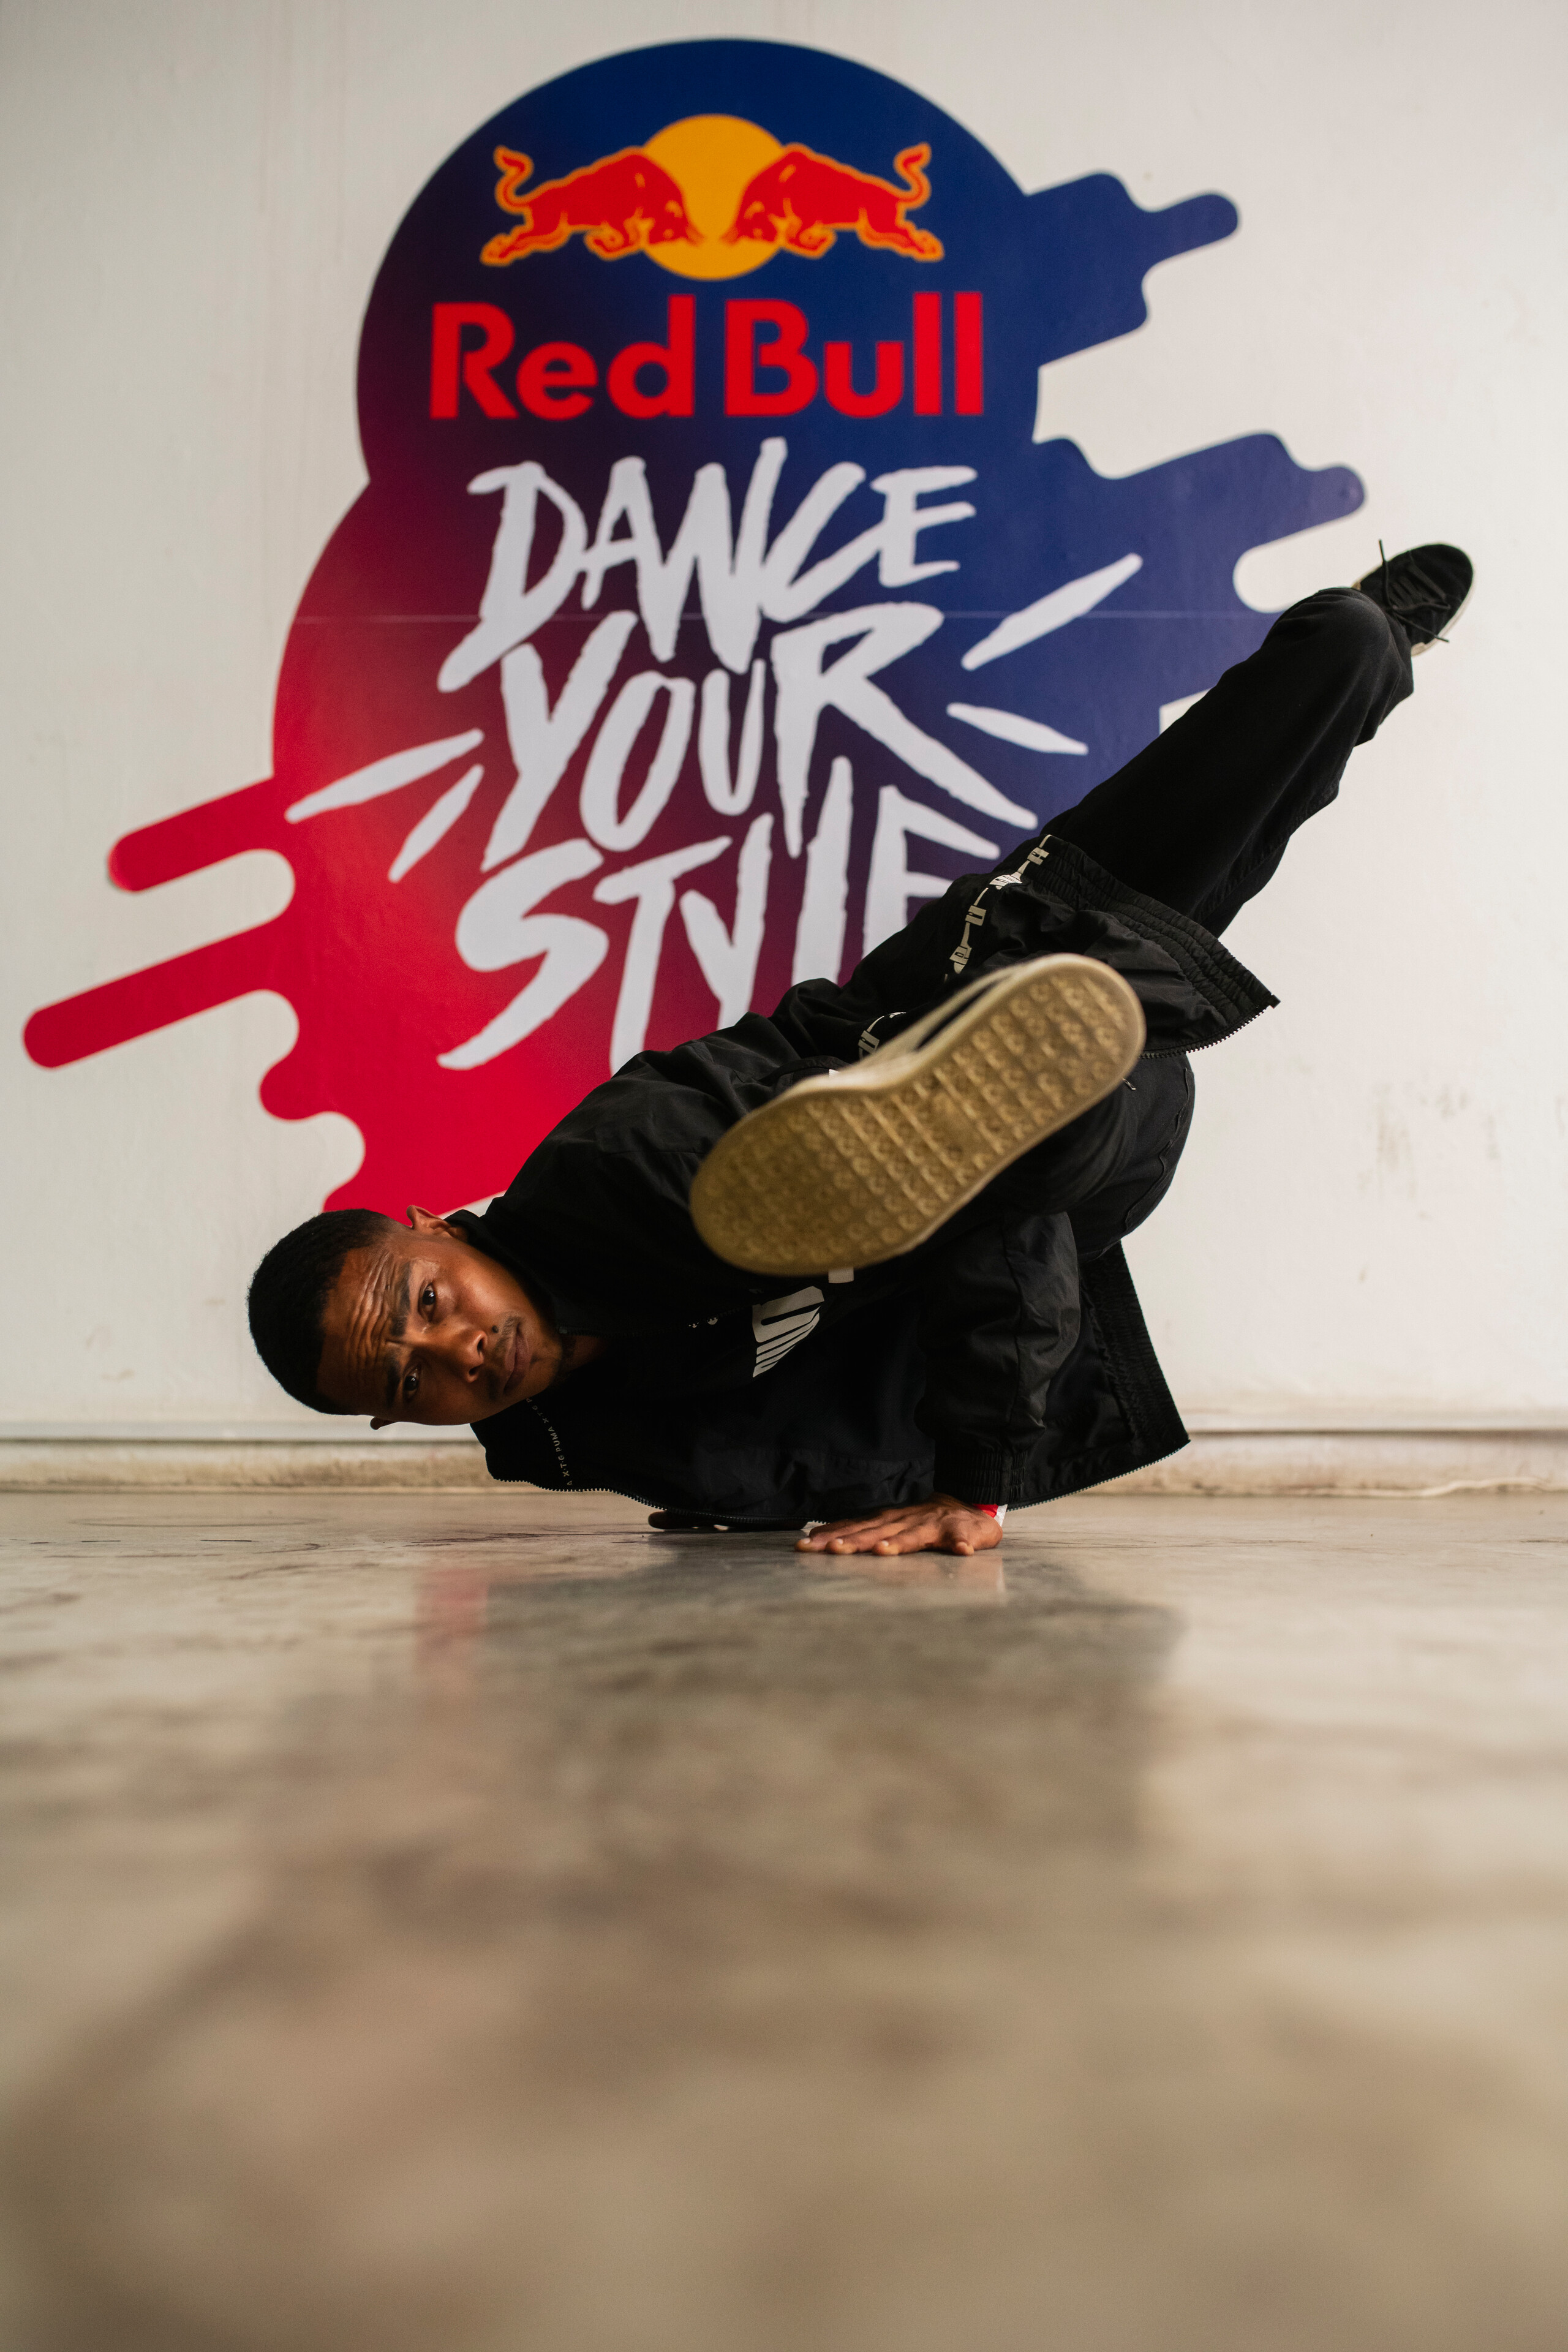 Red Bull dance champion set to represent SA in Paris Music In Africa